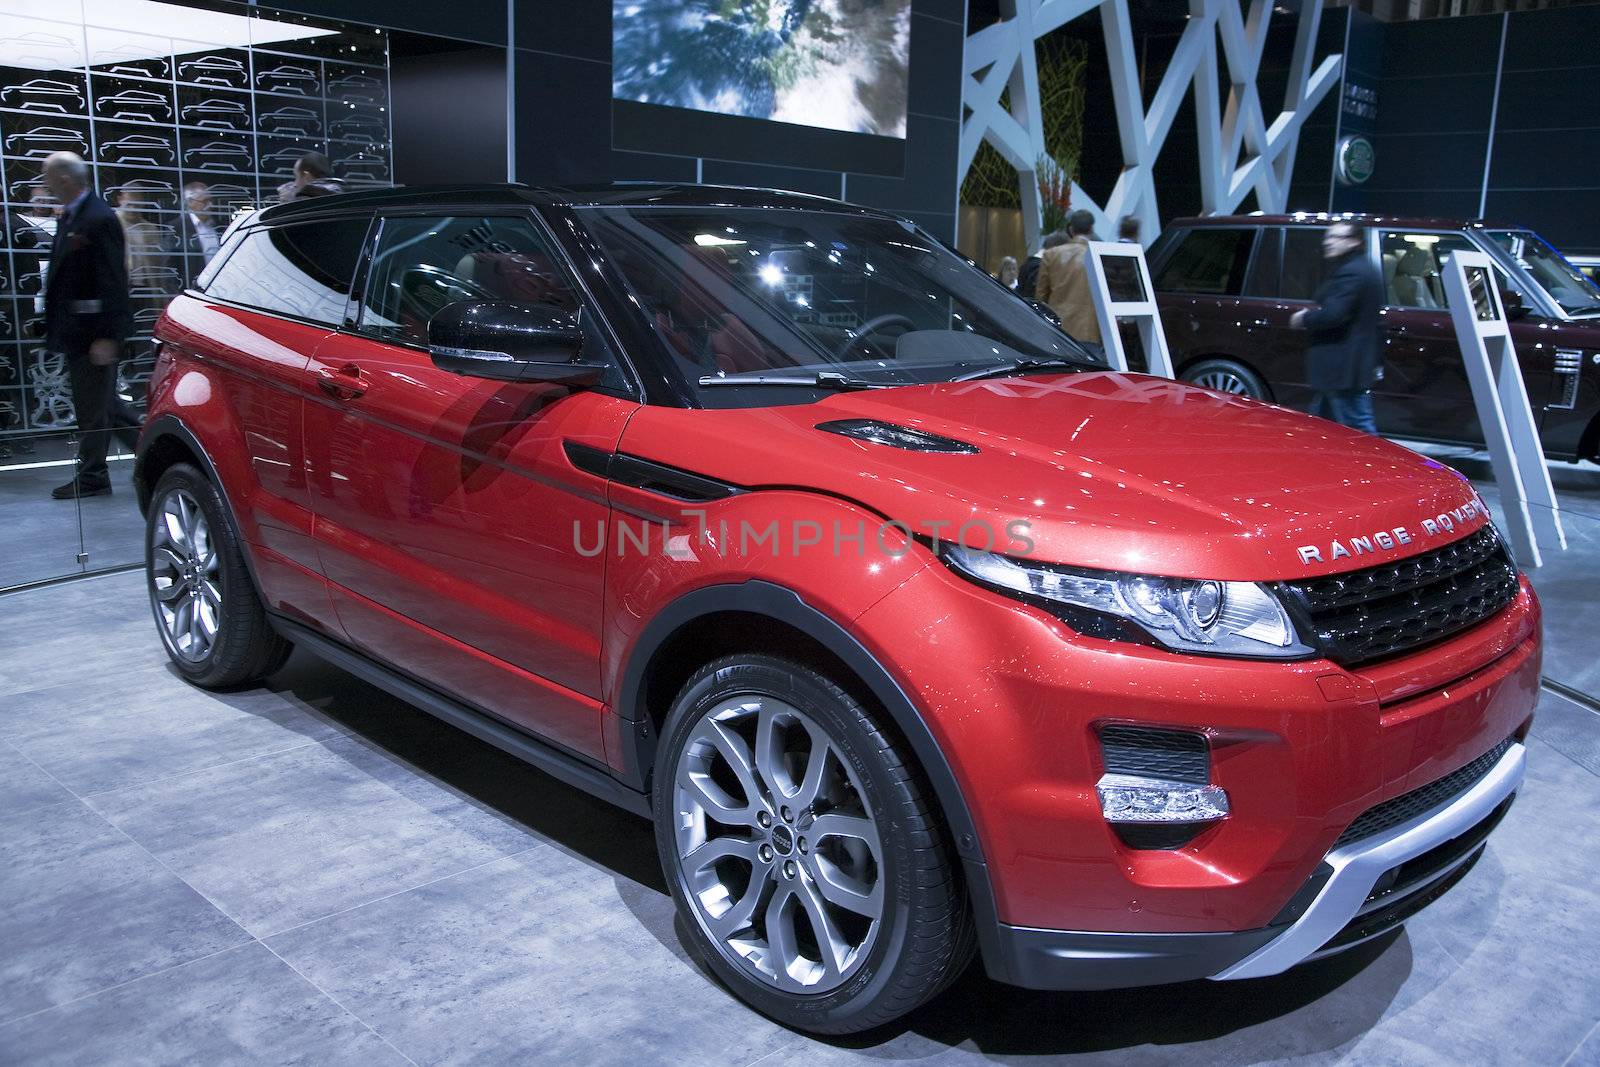 Range Rover Evoque Coupe by shadow69